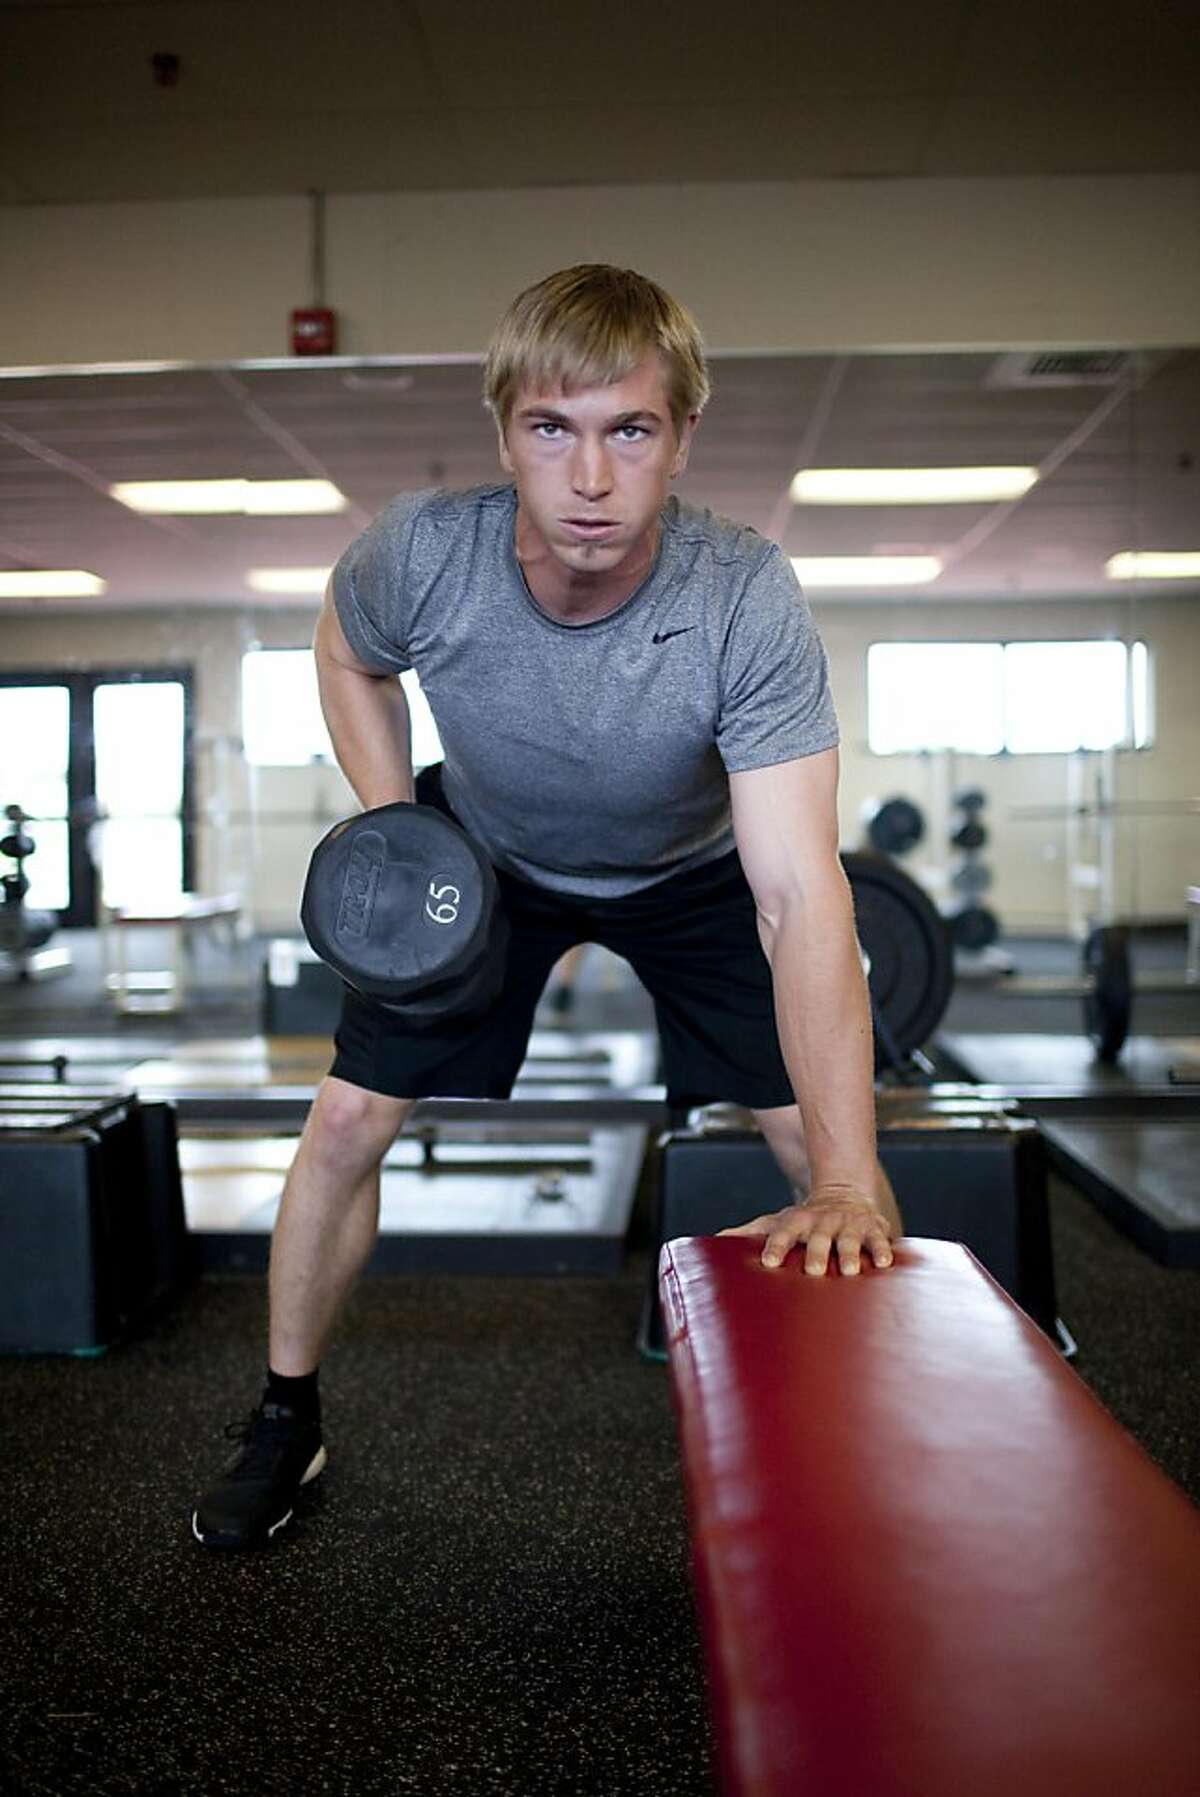 Jordan Pratt works out at the gym in Central High School in Independence, Oregon in preparation for his new role as a 26-year-old walk-on wide receiver at Stanford University. Pratt, a three-sport star in high school in Oregon, disappointed football recruiters in 2003 by signing with the Dodgers but is now changing courses. (Vivian Johnson, Special to the Chronicle)